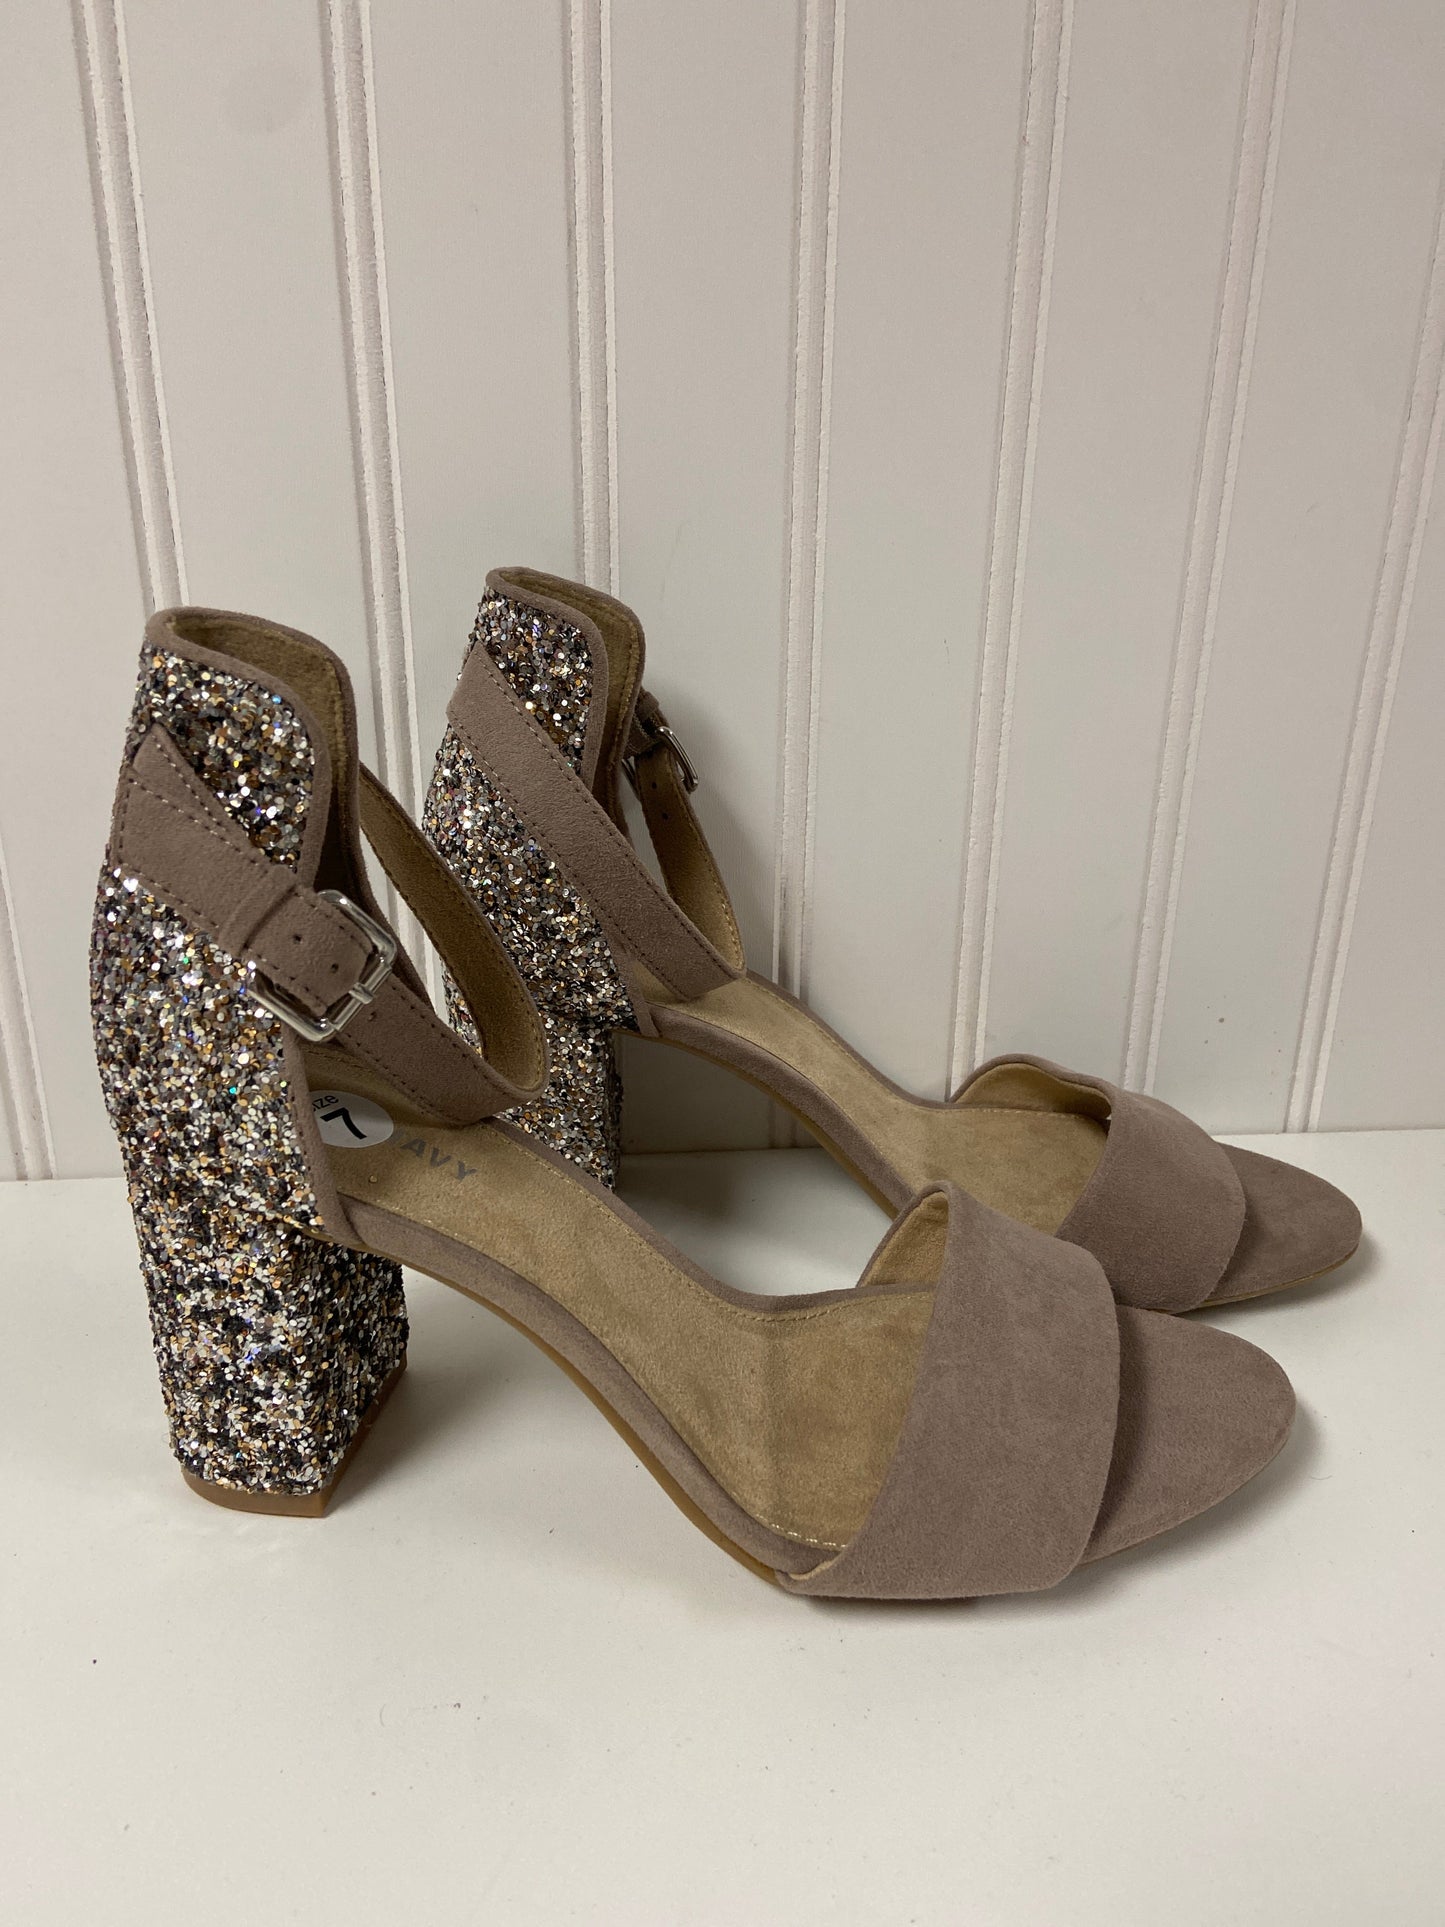 Taupe Sandals Heels Block Old Navy, Size 7